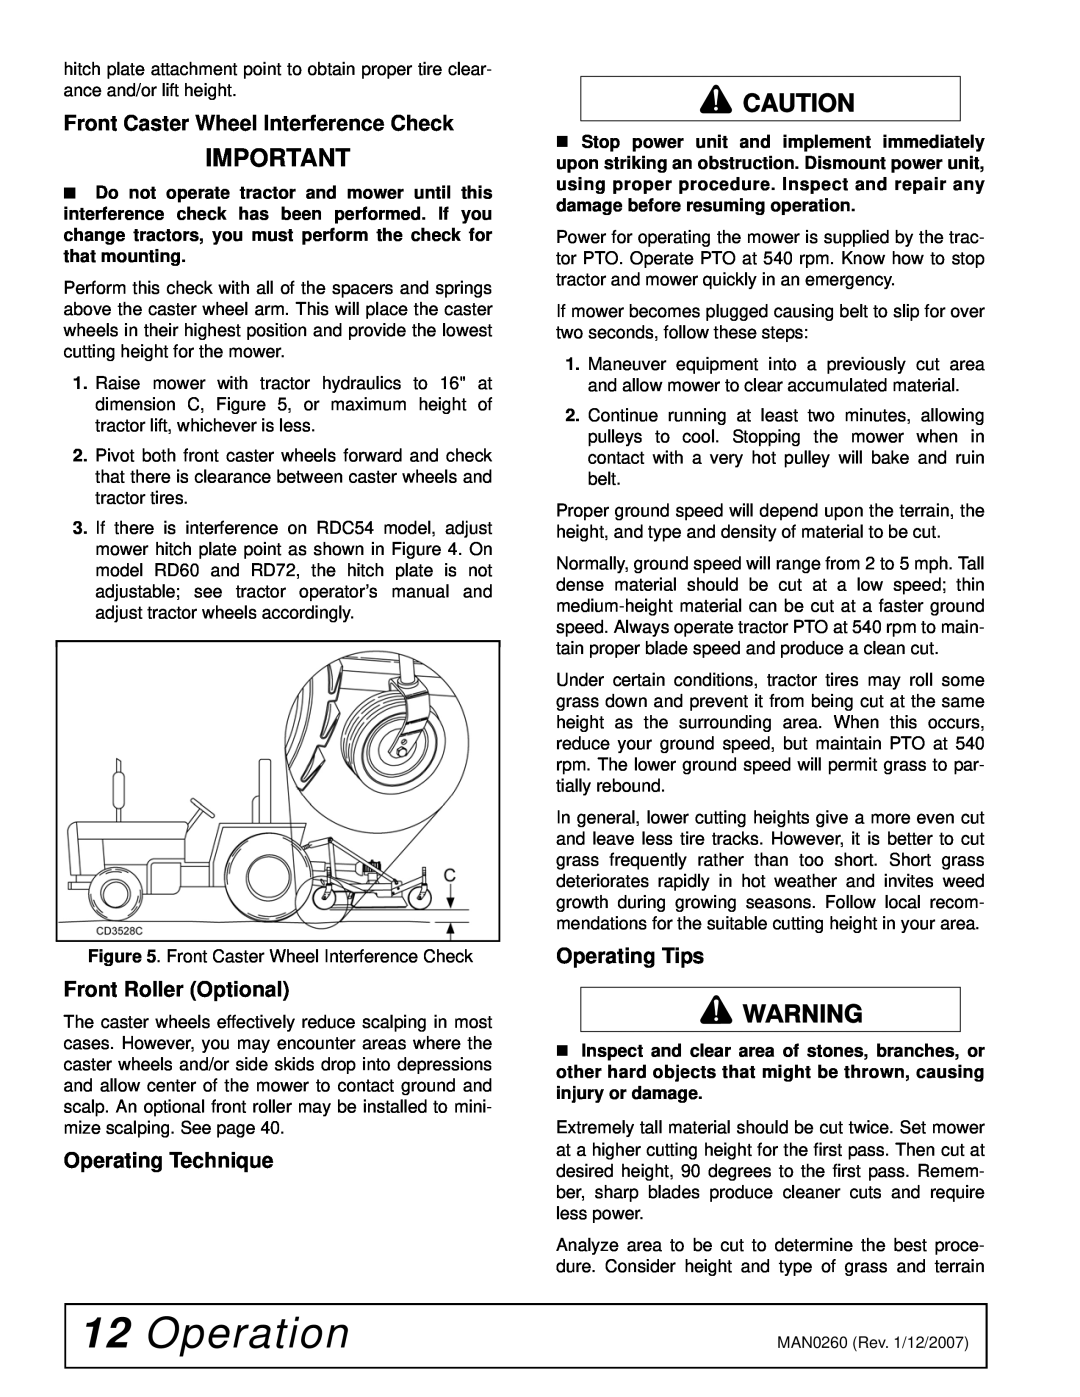 Woods Equipment RDC54, RD72 Operation, Front Caster Wheel Interference Check, Front Roller Optional, Operating Technique 